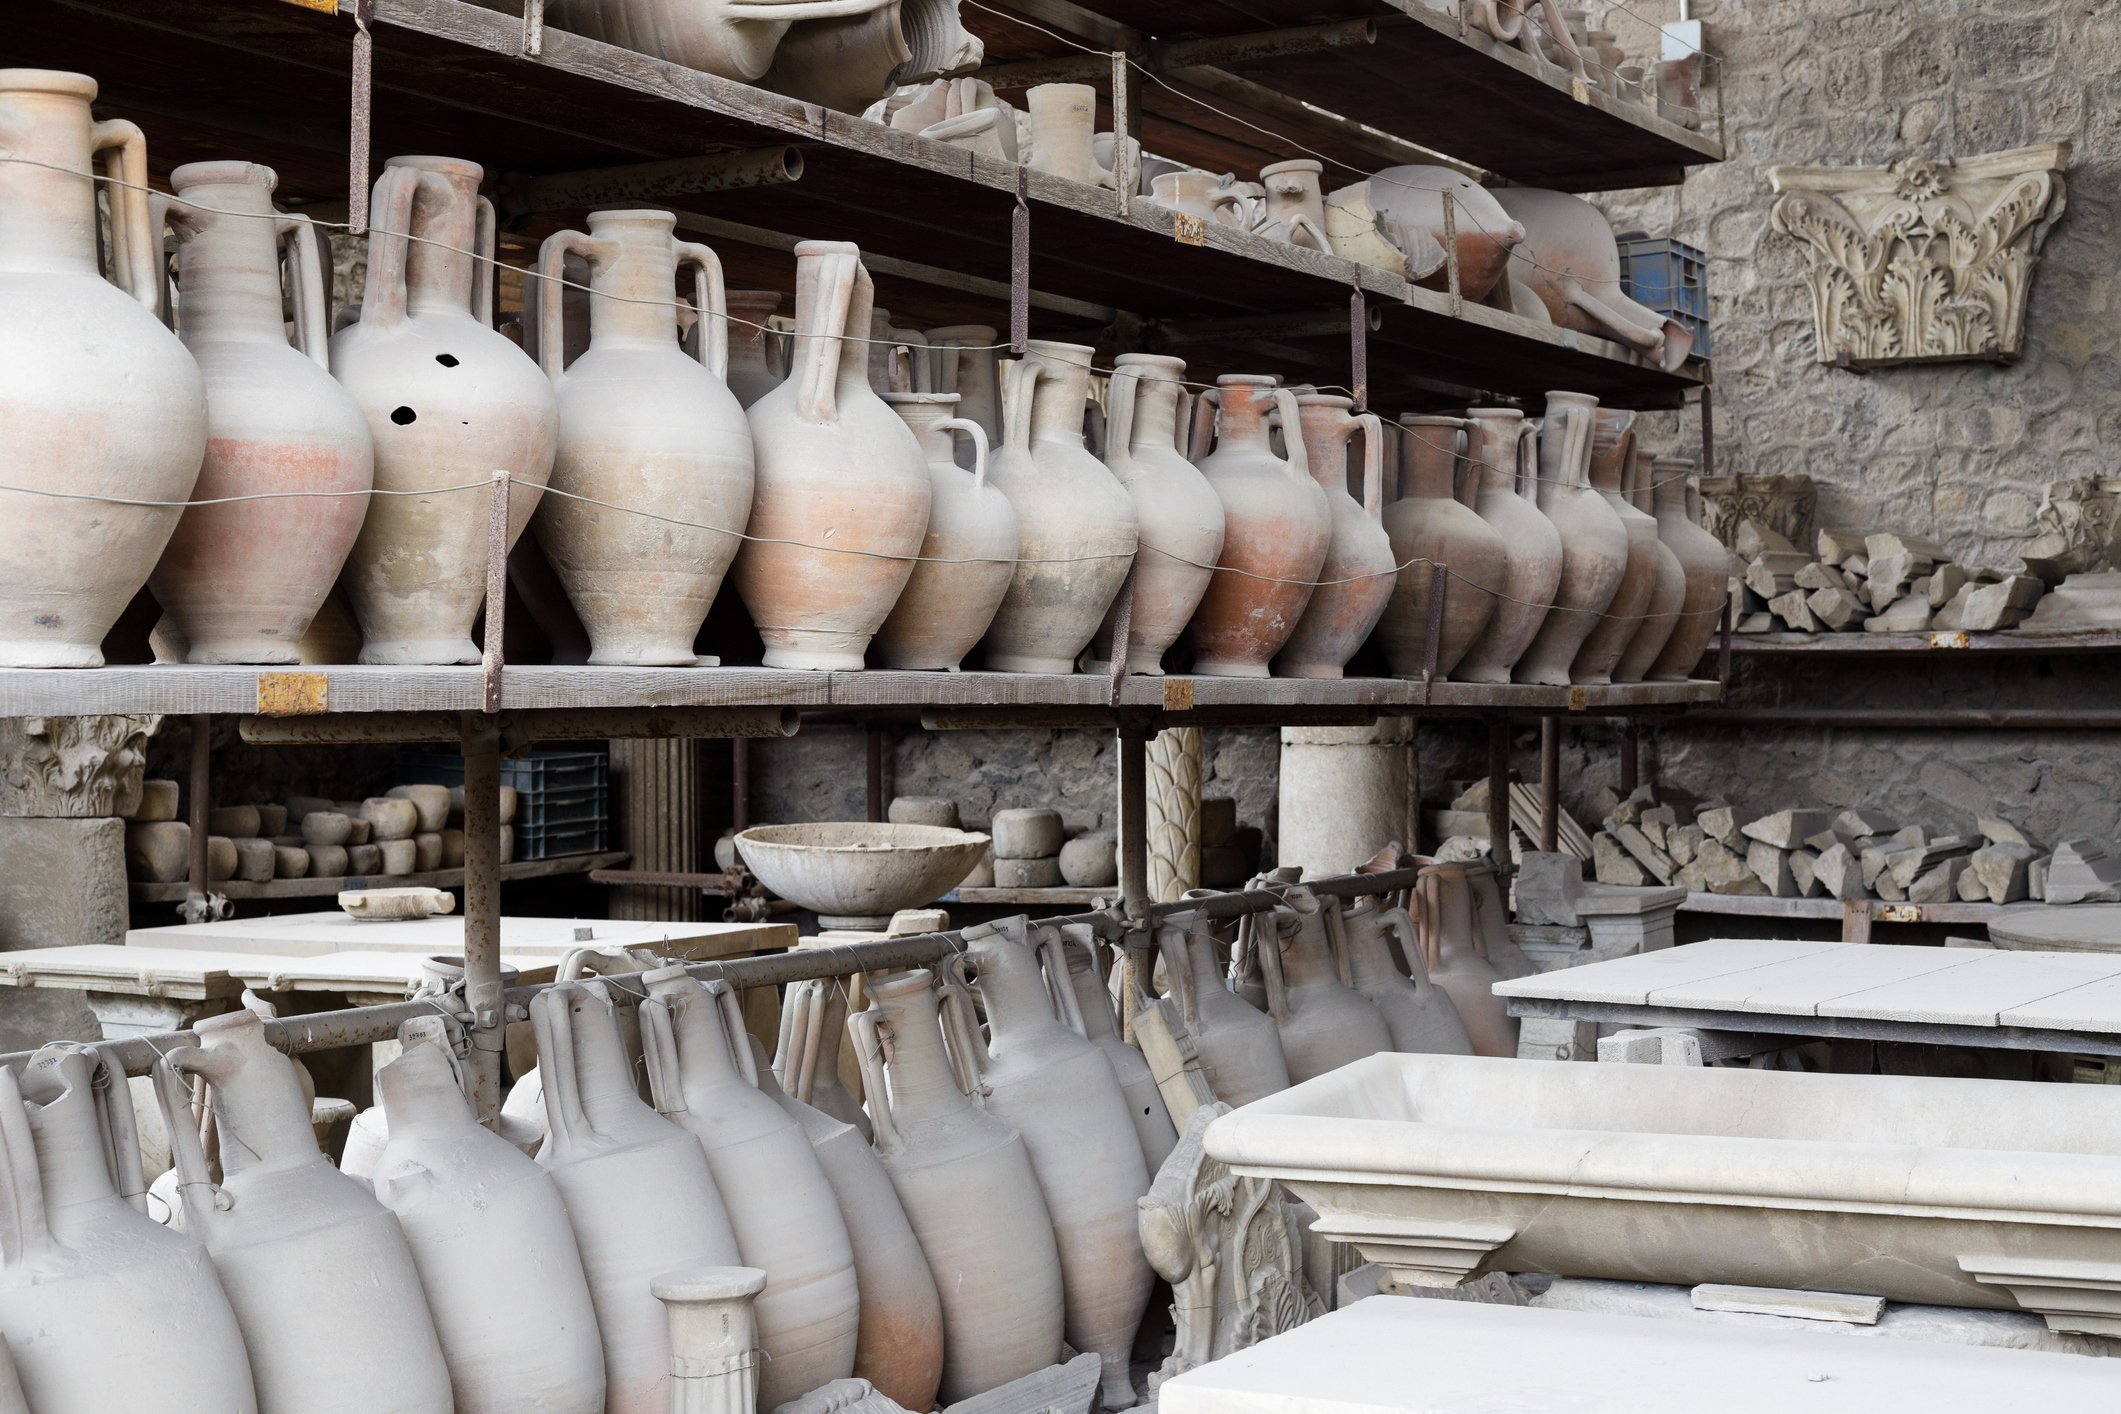 Ancient clay pottery amphora vases and pots from Pompeii in the Roman Empire in Italy. | Photo: Getty Images